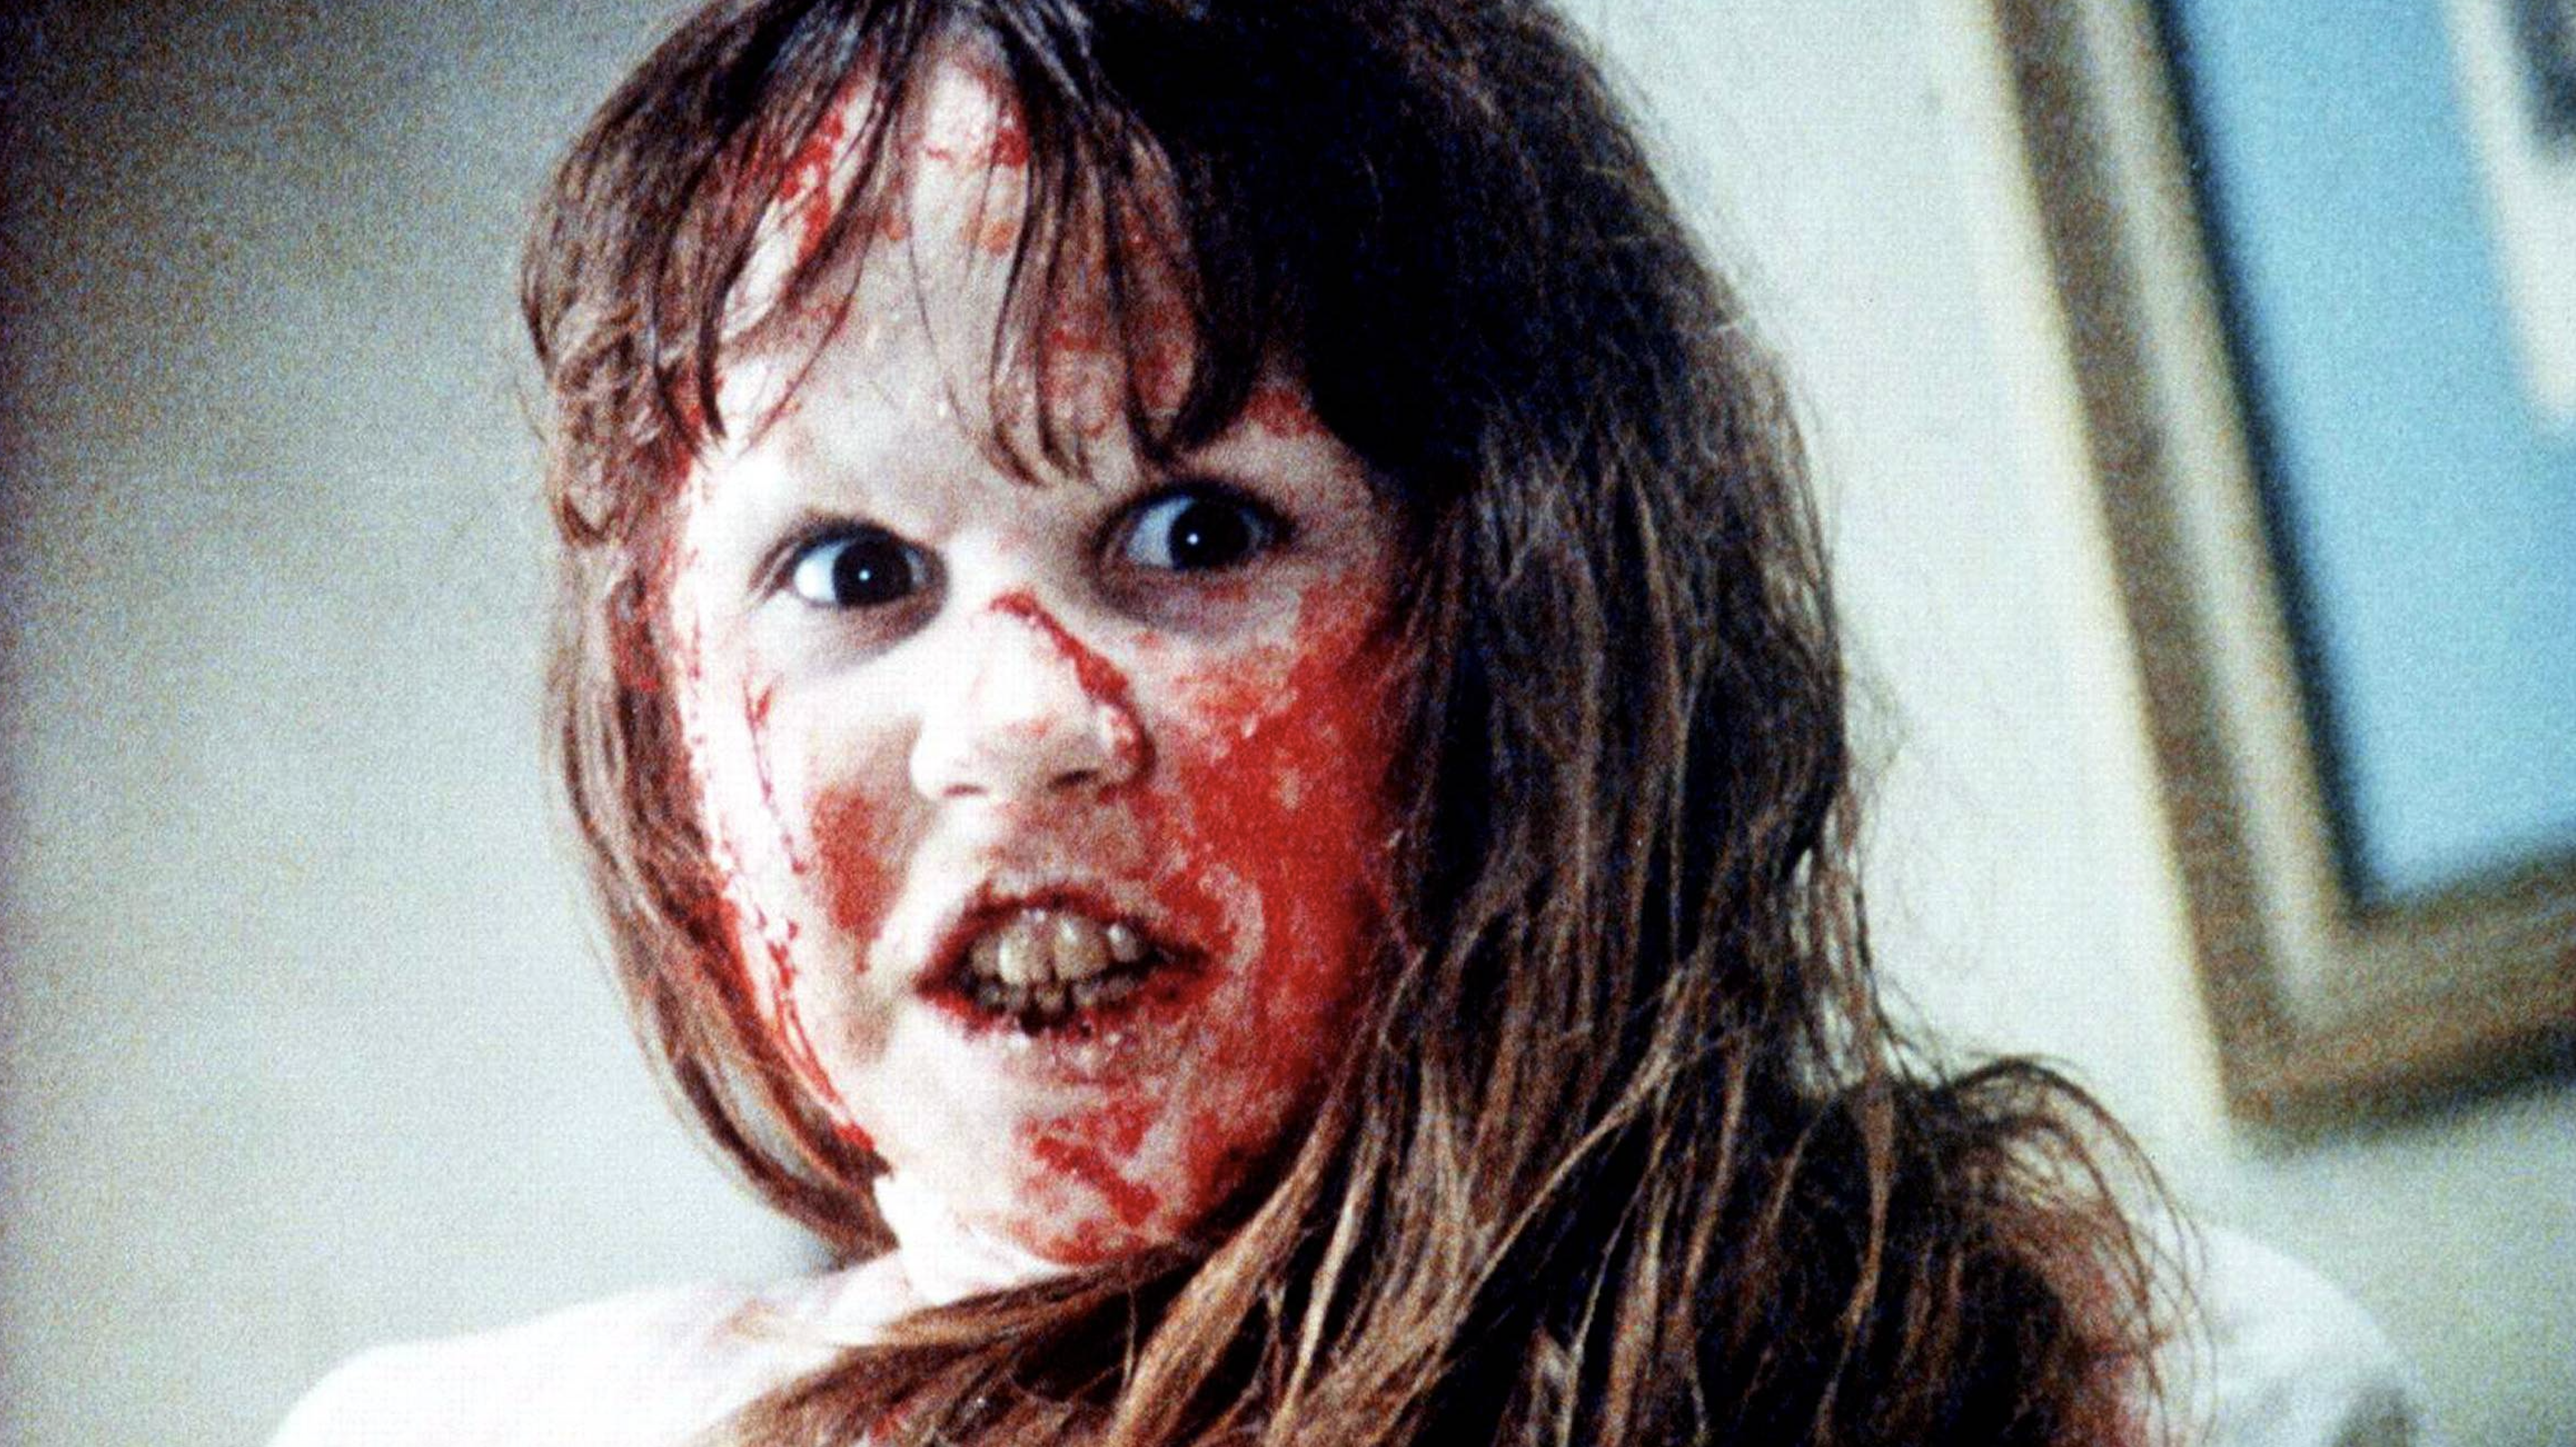 Blumhouse Overhauls ‘Exorcist’ Franchise Plans, Sets Mike Flanagan to Direct New Movie